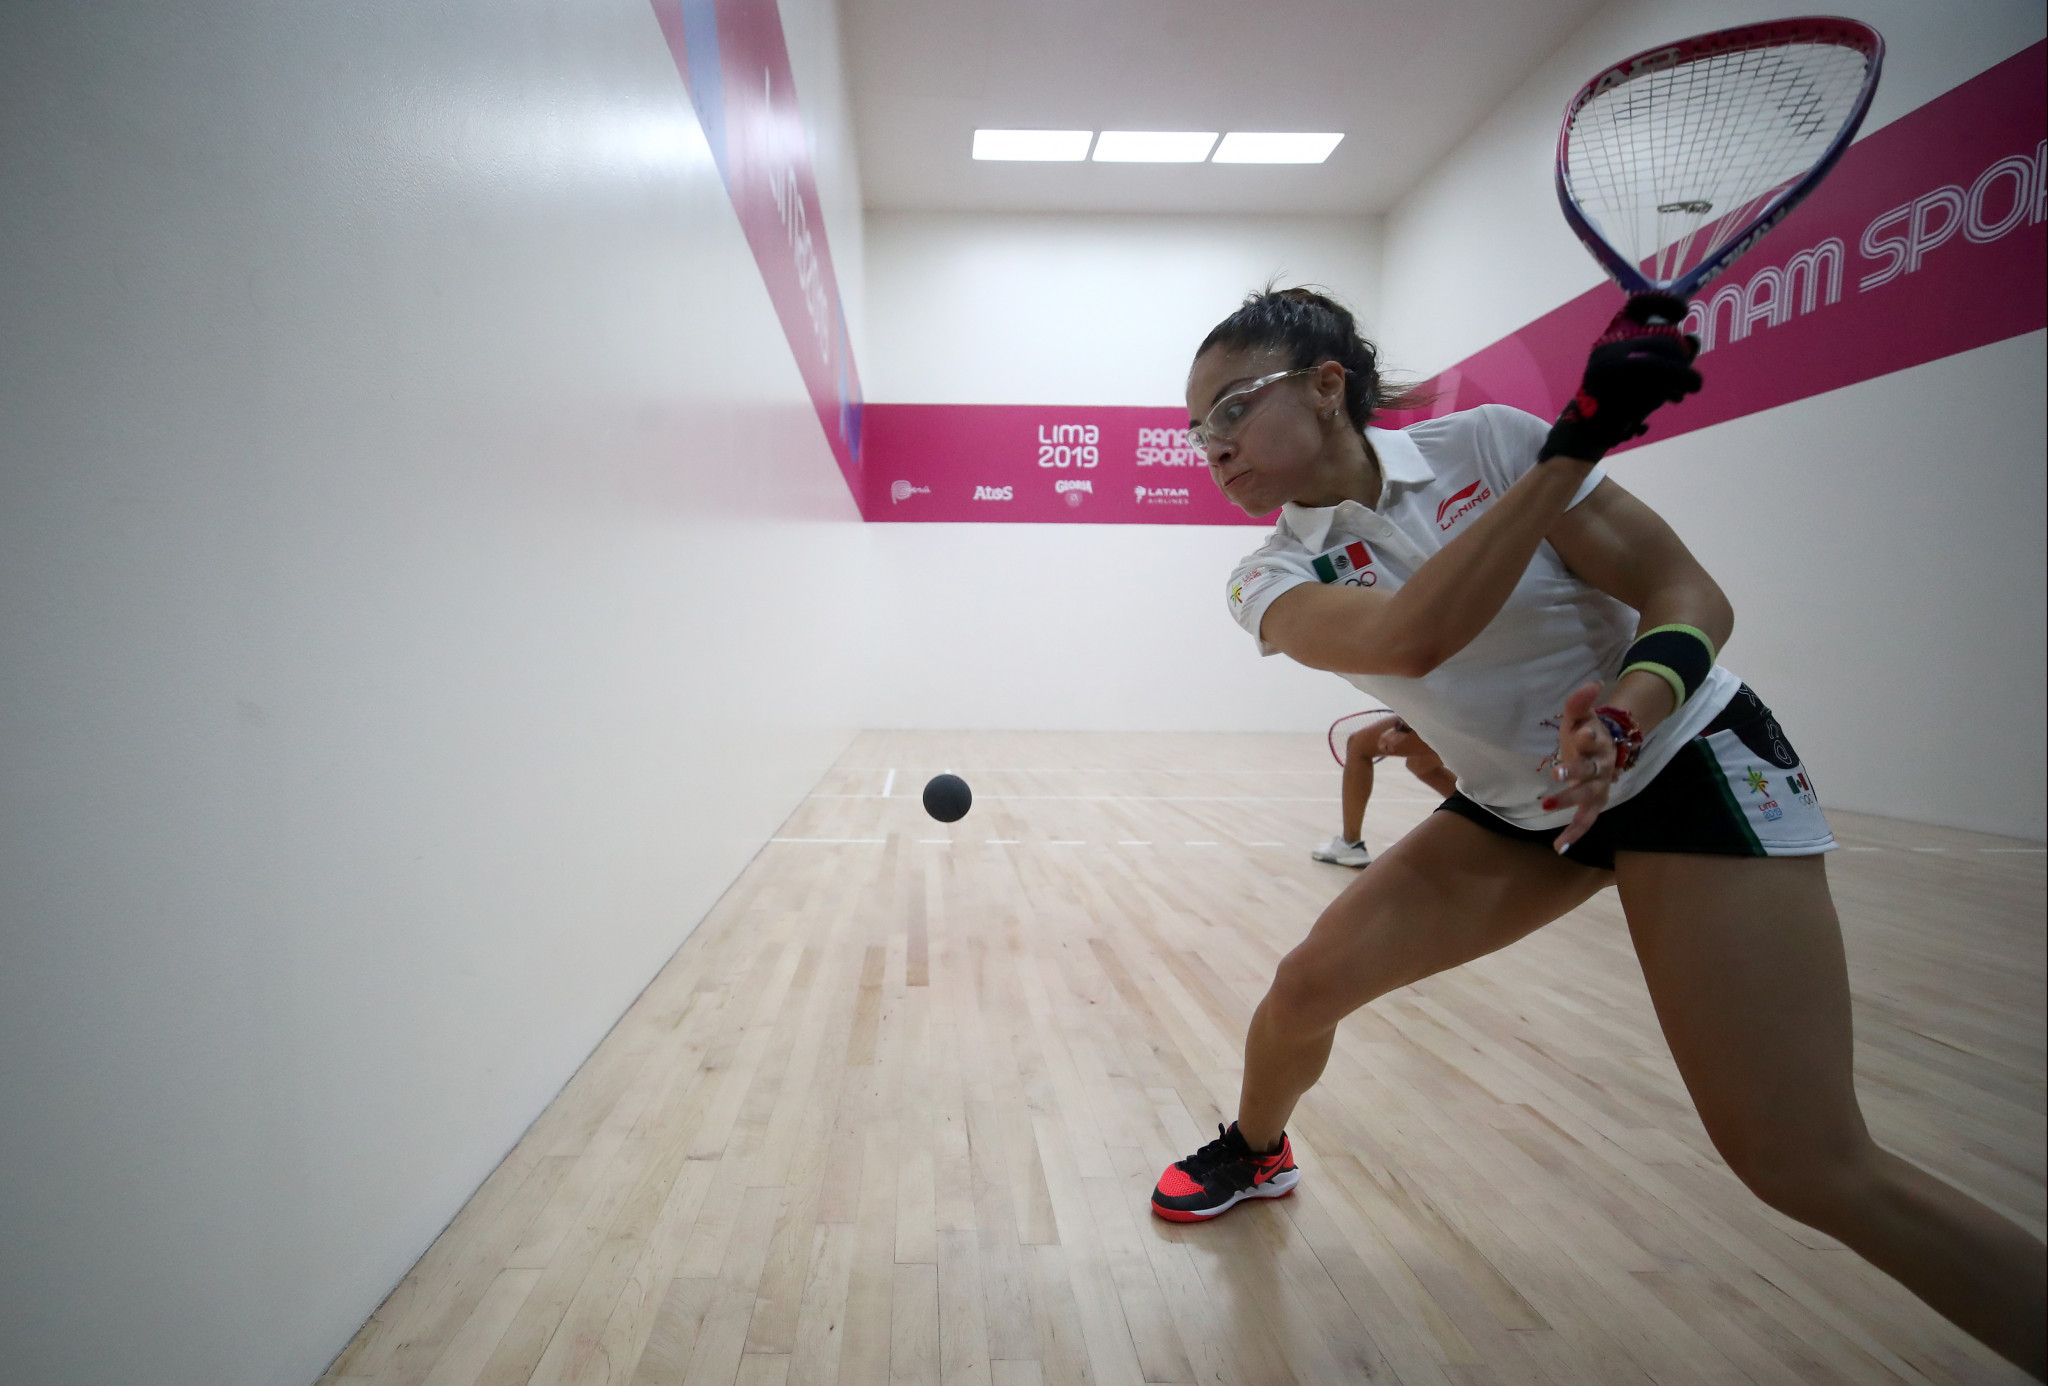 Mexican racquetball star Paola Longoria sits just outside the top three in the voting so far ©Getty Images